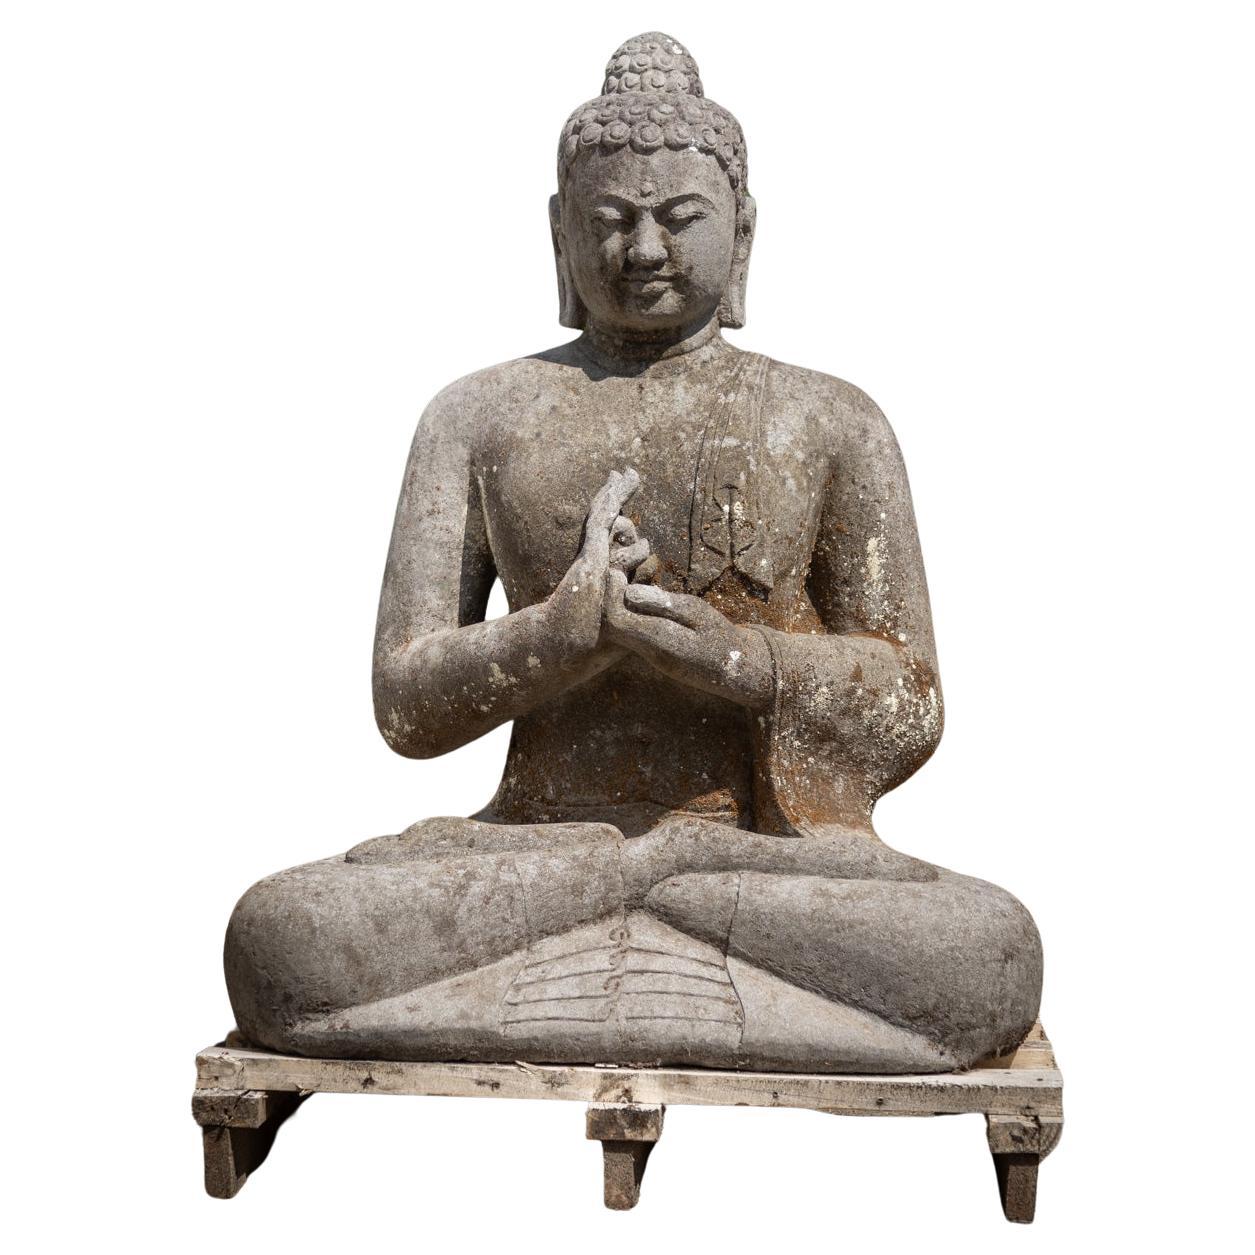 Mid 20th century large old lavastone Buddha statue in Dharmachakra mudra  For Sale